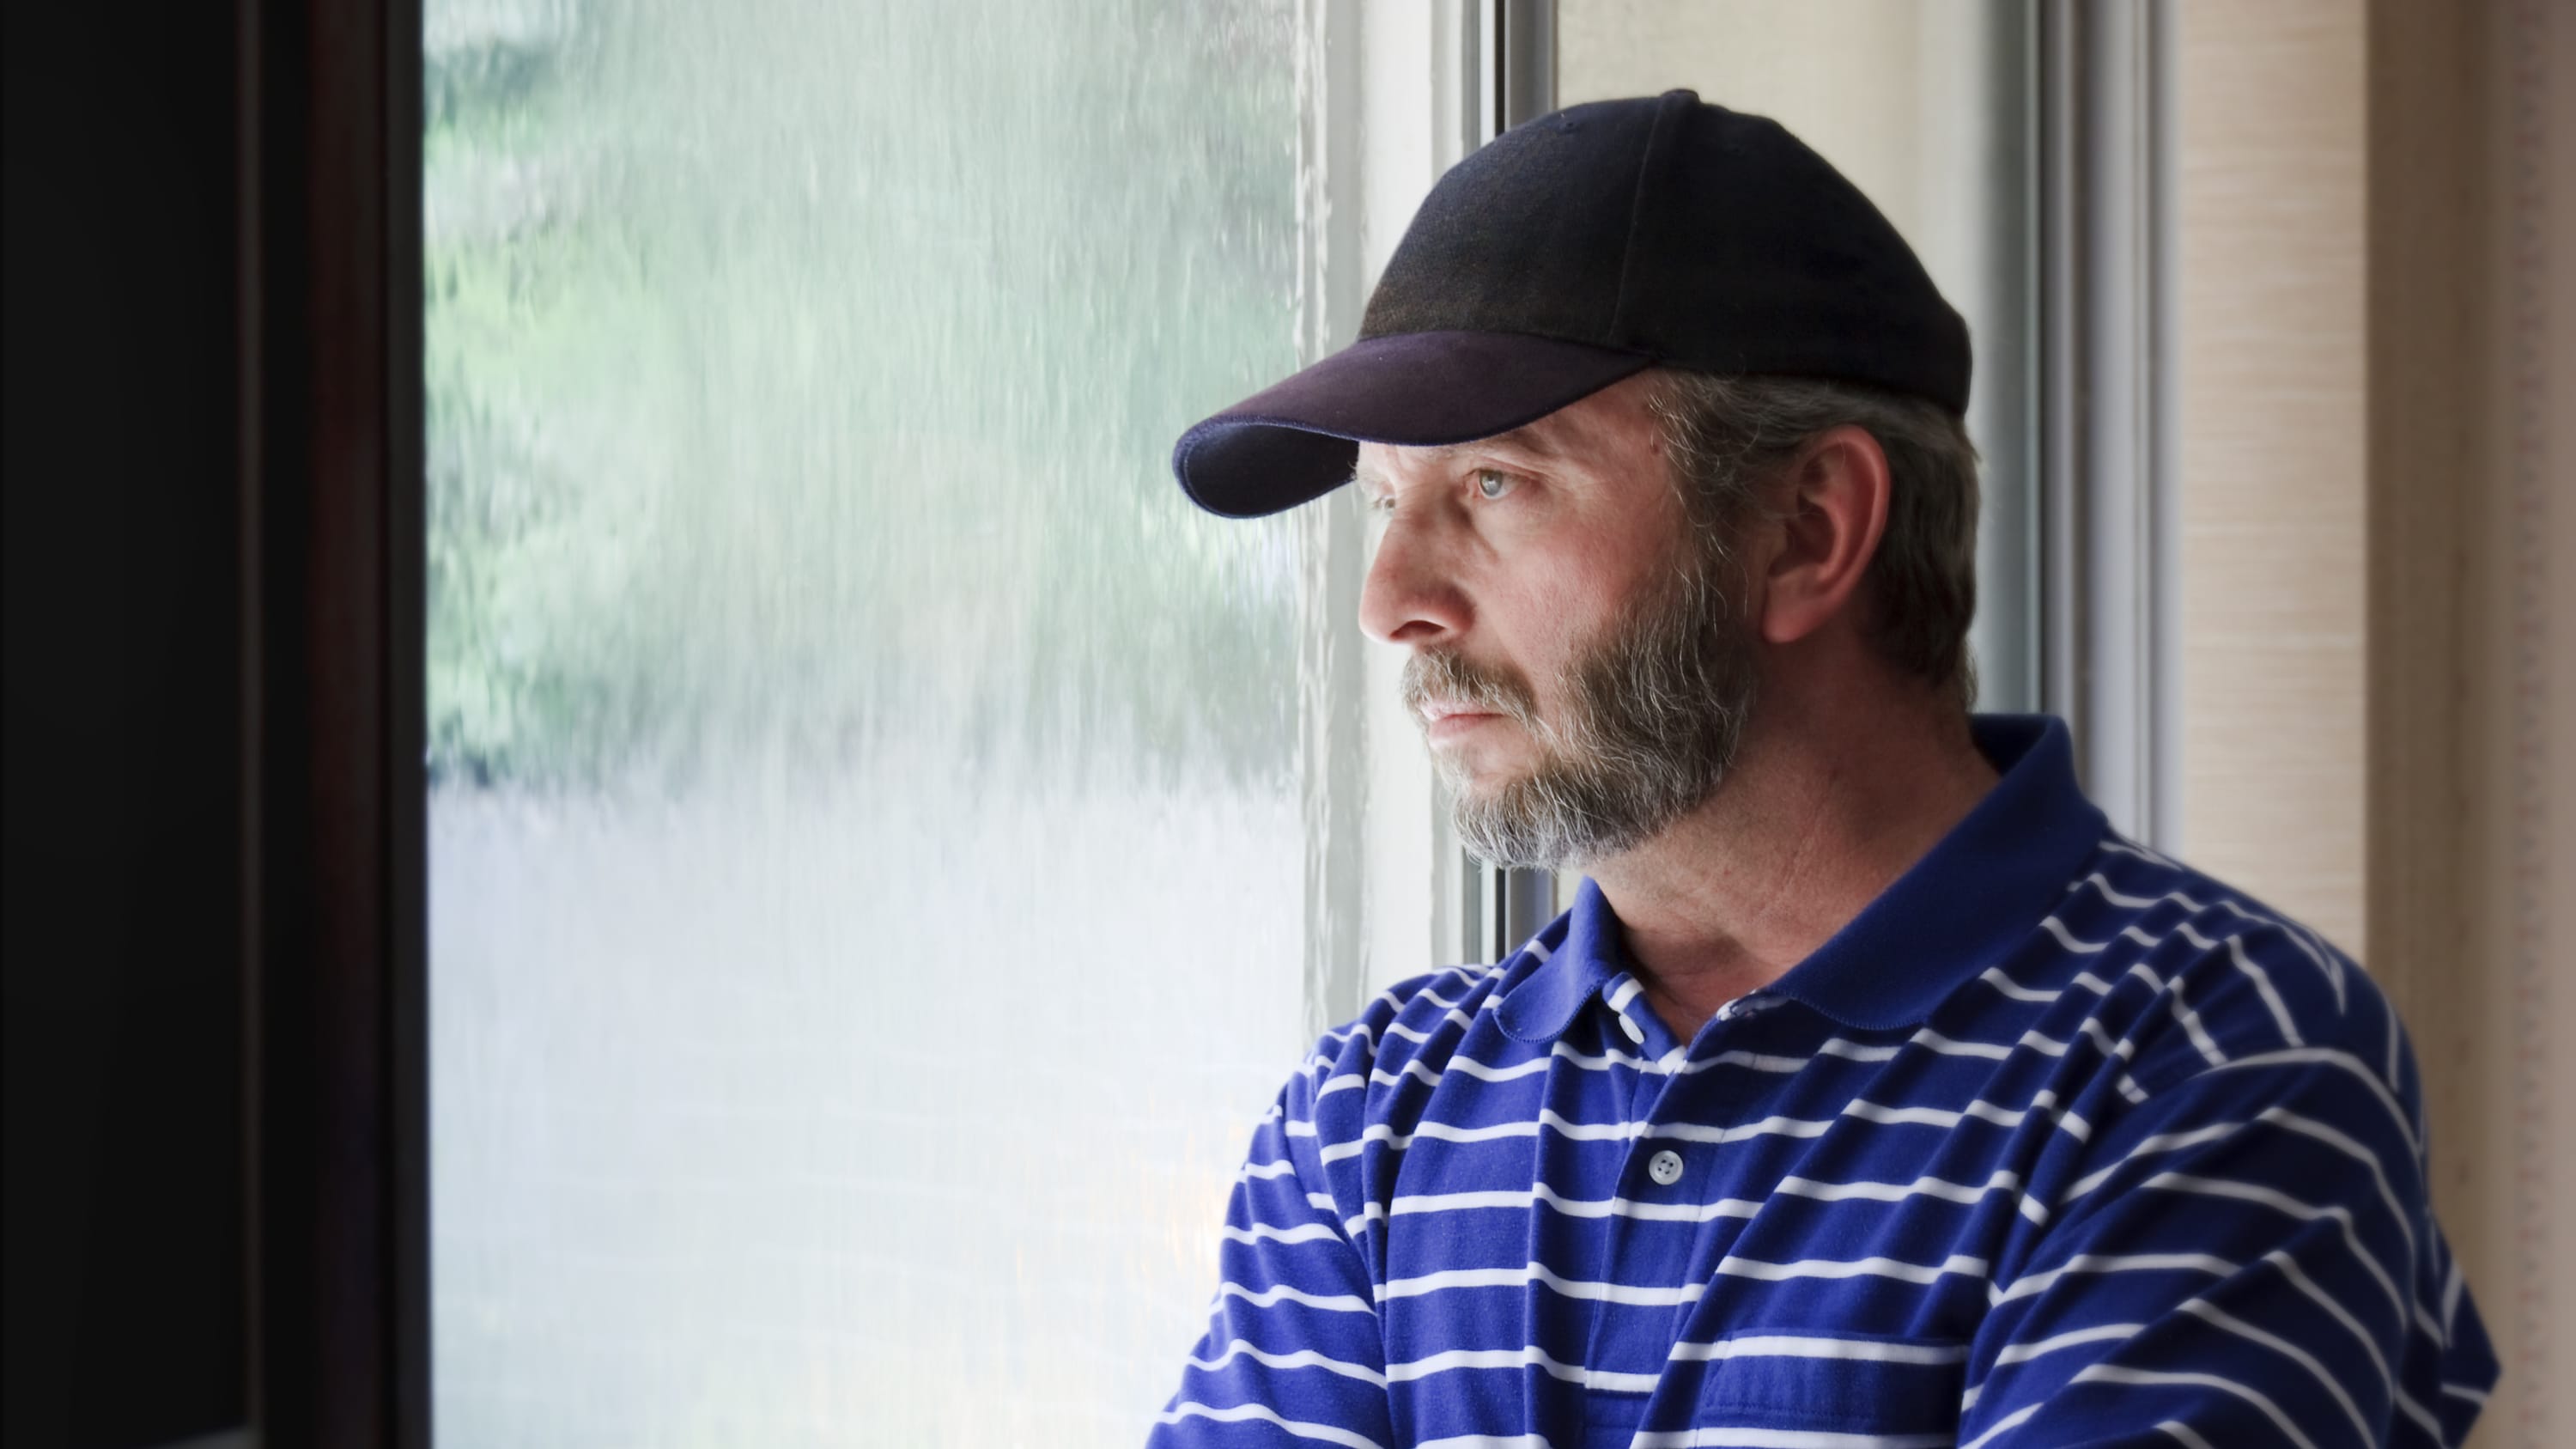 Adult male looking out a rain covered window looking concerned, possibly about a gambling disorder